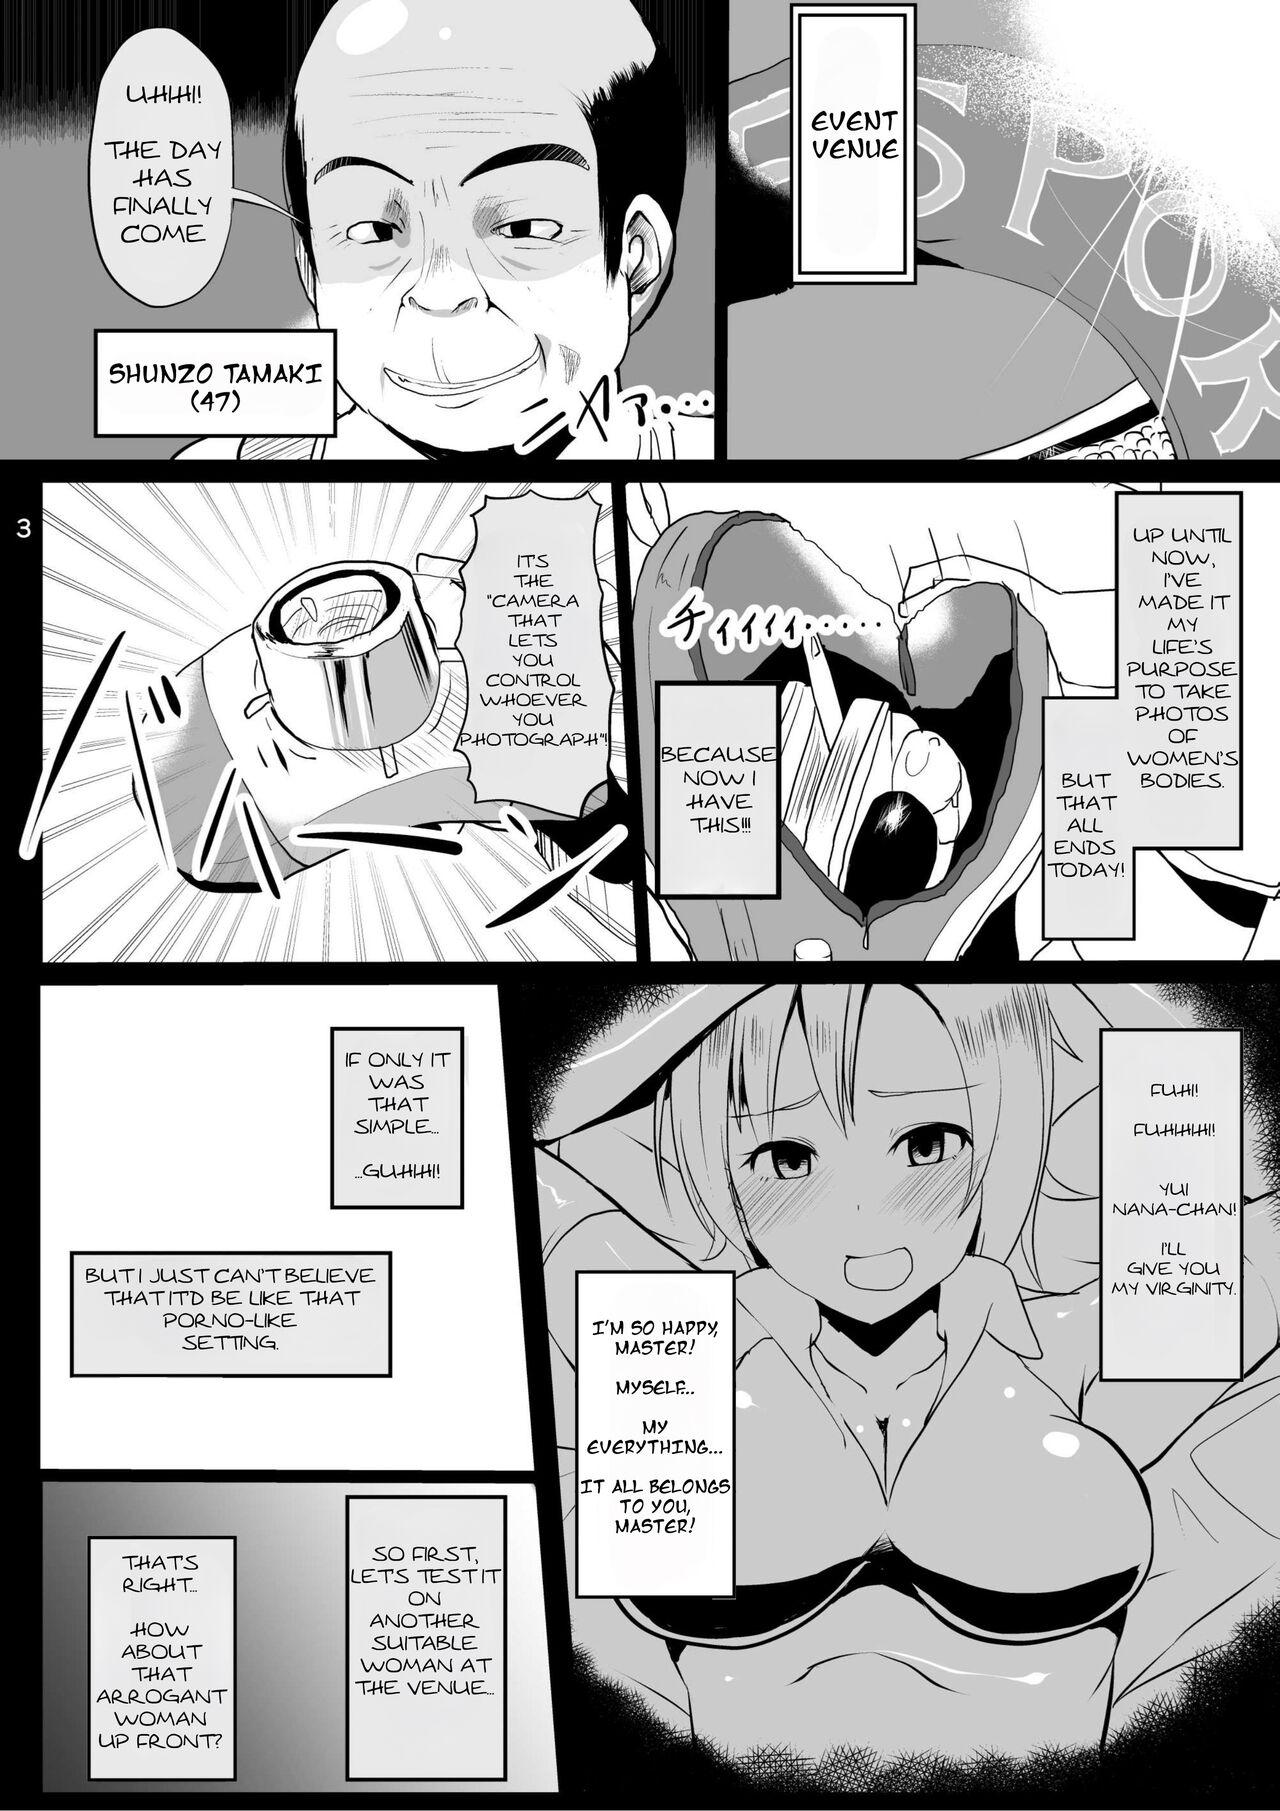 Awesome Onna no Kokoro o Ossanka Suru Camera | Changing a Woman's Heart to an Old Man's With a Camera - Original Hot Wife - Page 4